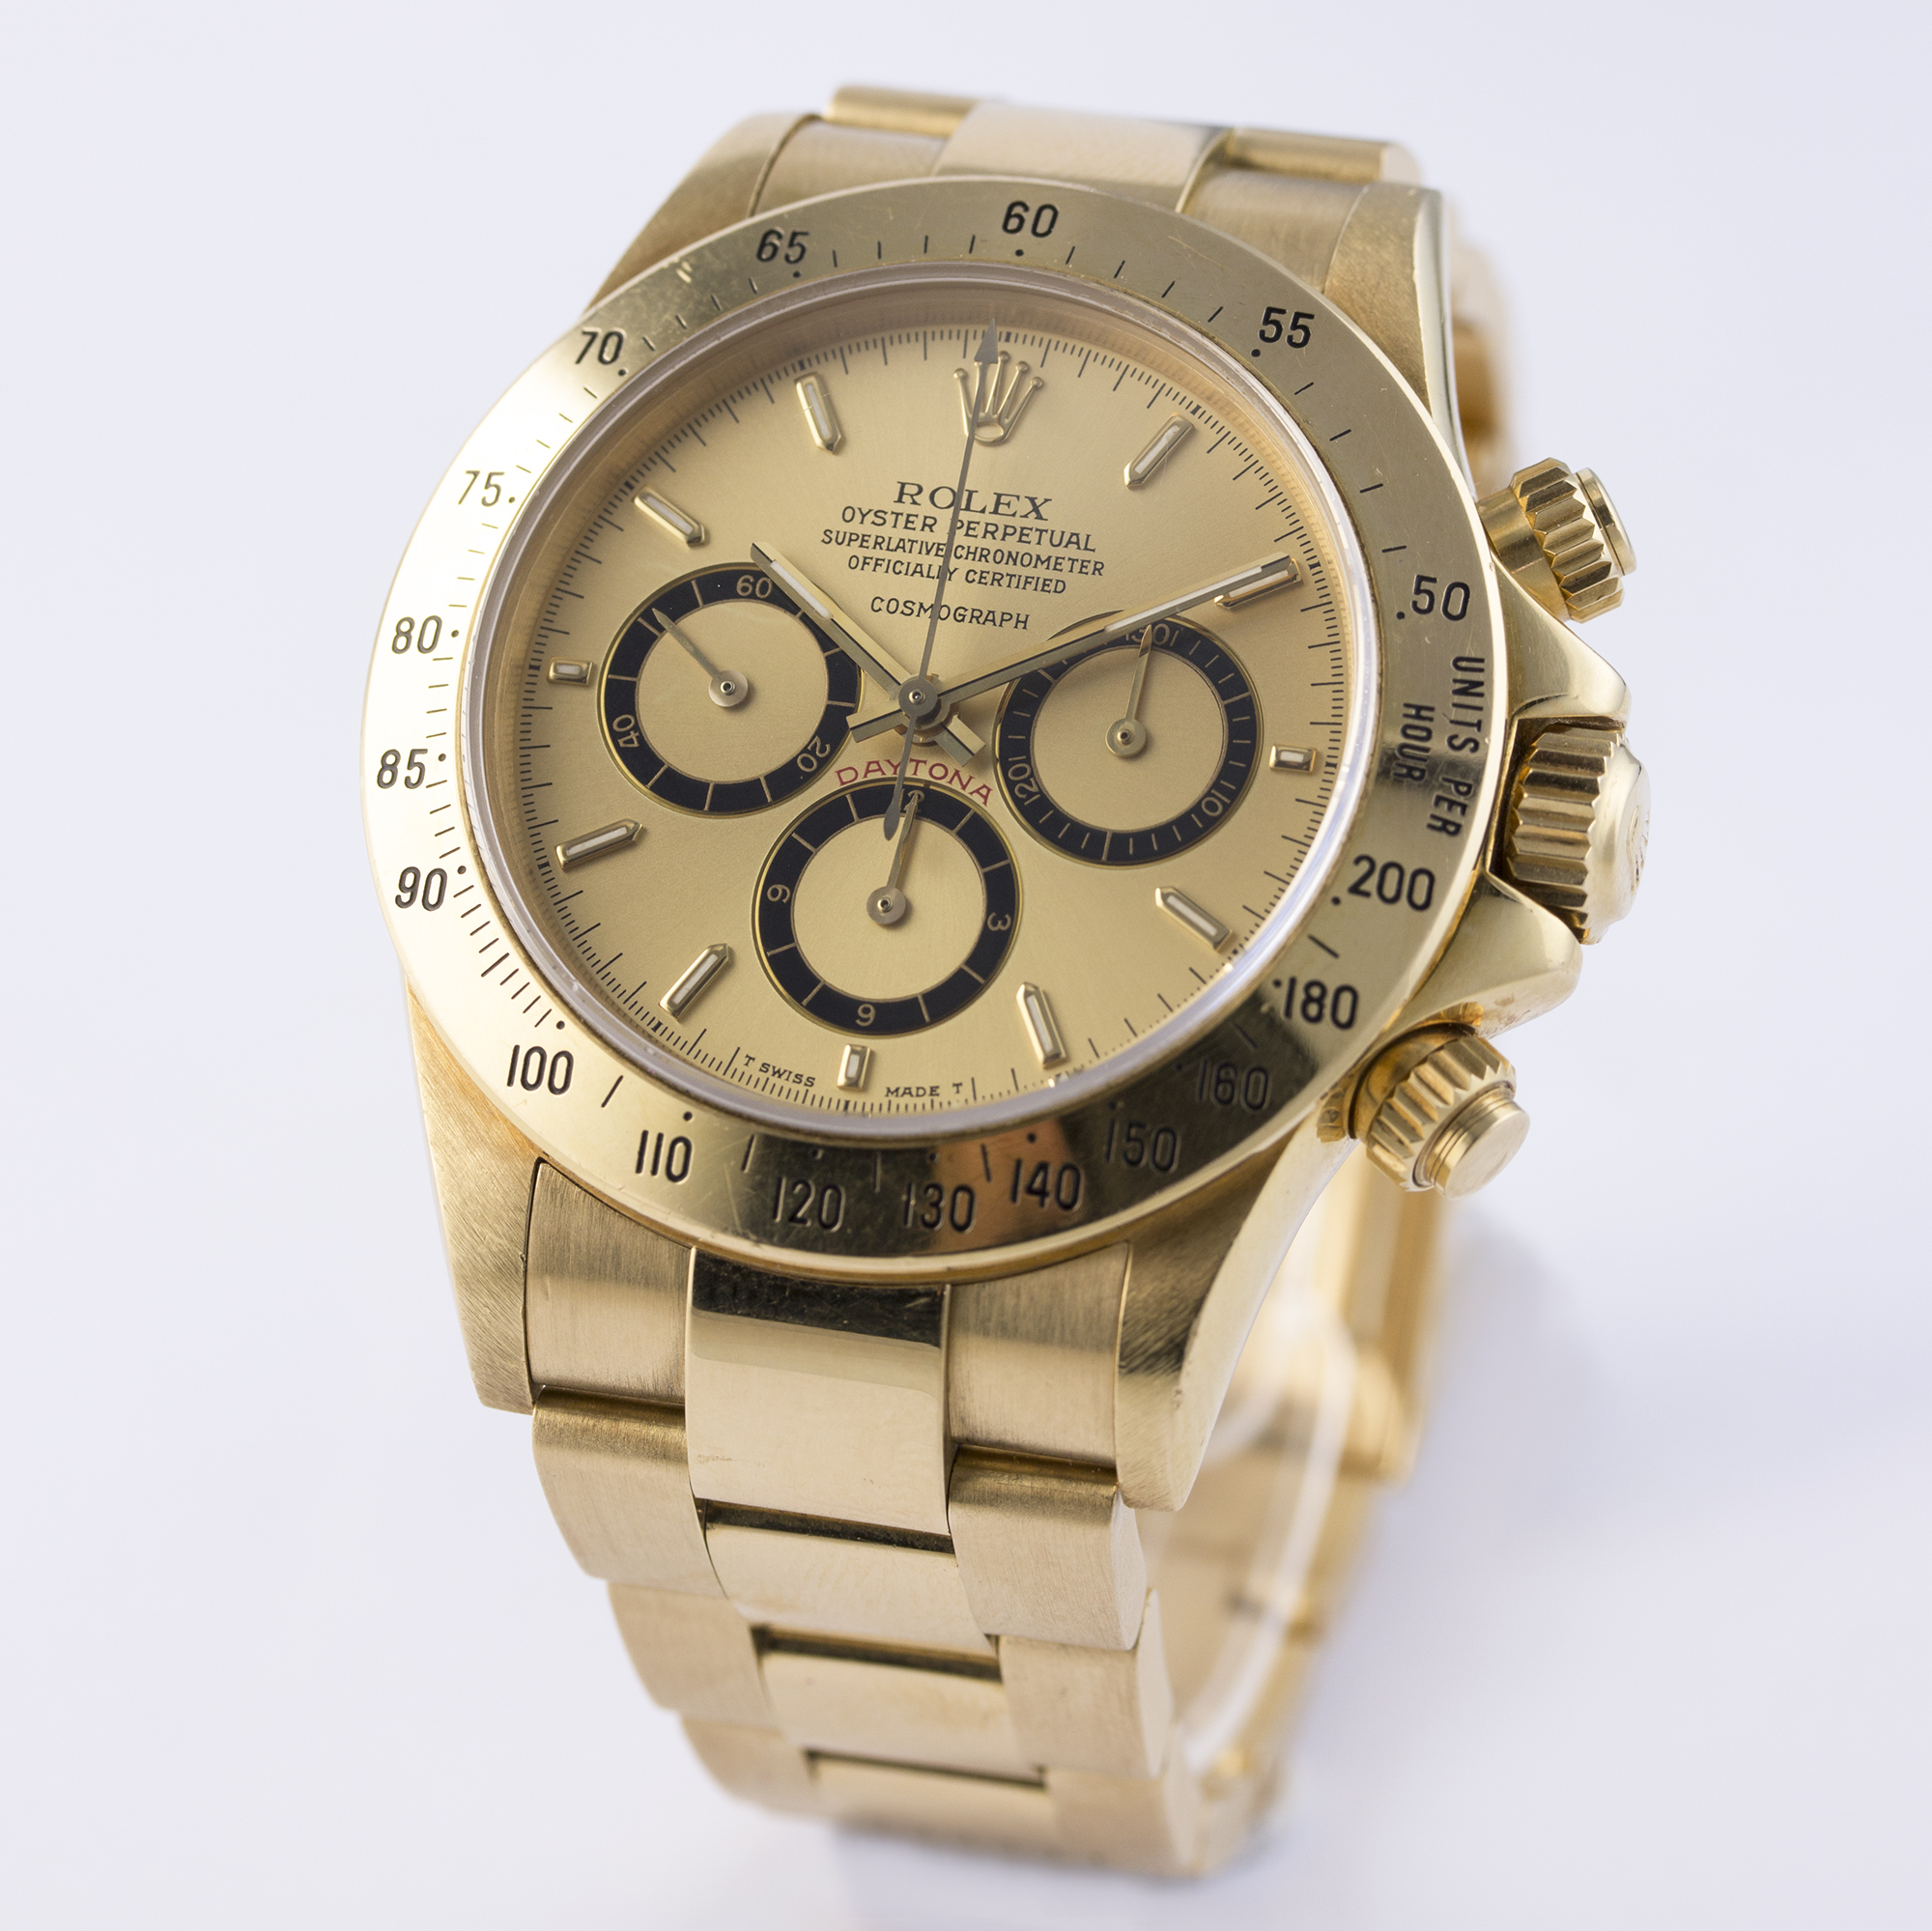 A FINE & RARE GENTLEMAN'S 18K SOLID GOLD ROLEX OYSTER PERPETUAL "FLOATING DIAL" COSMOGRAPH DAYTONA - Image 3 of 6